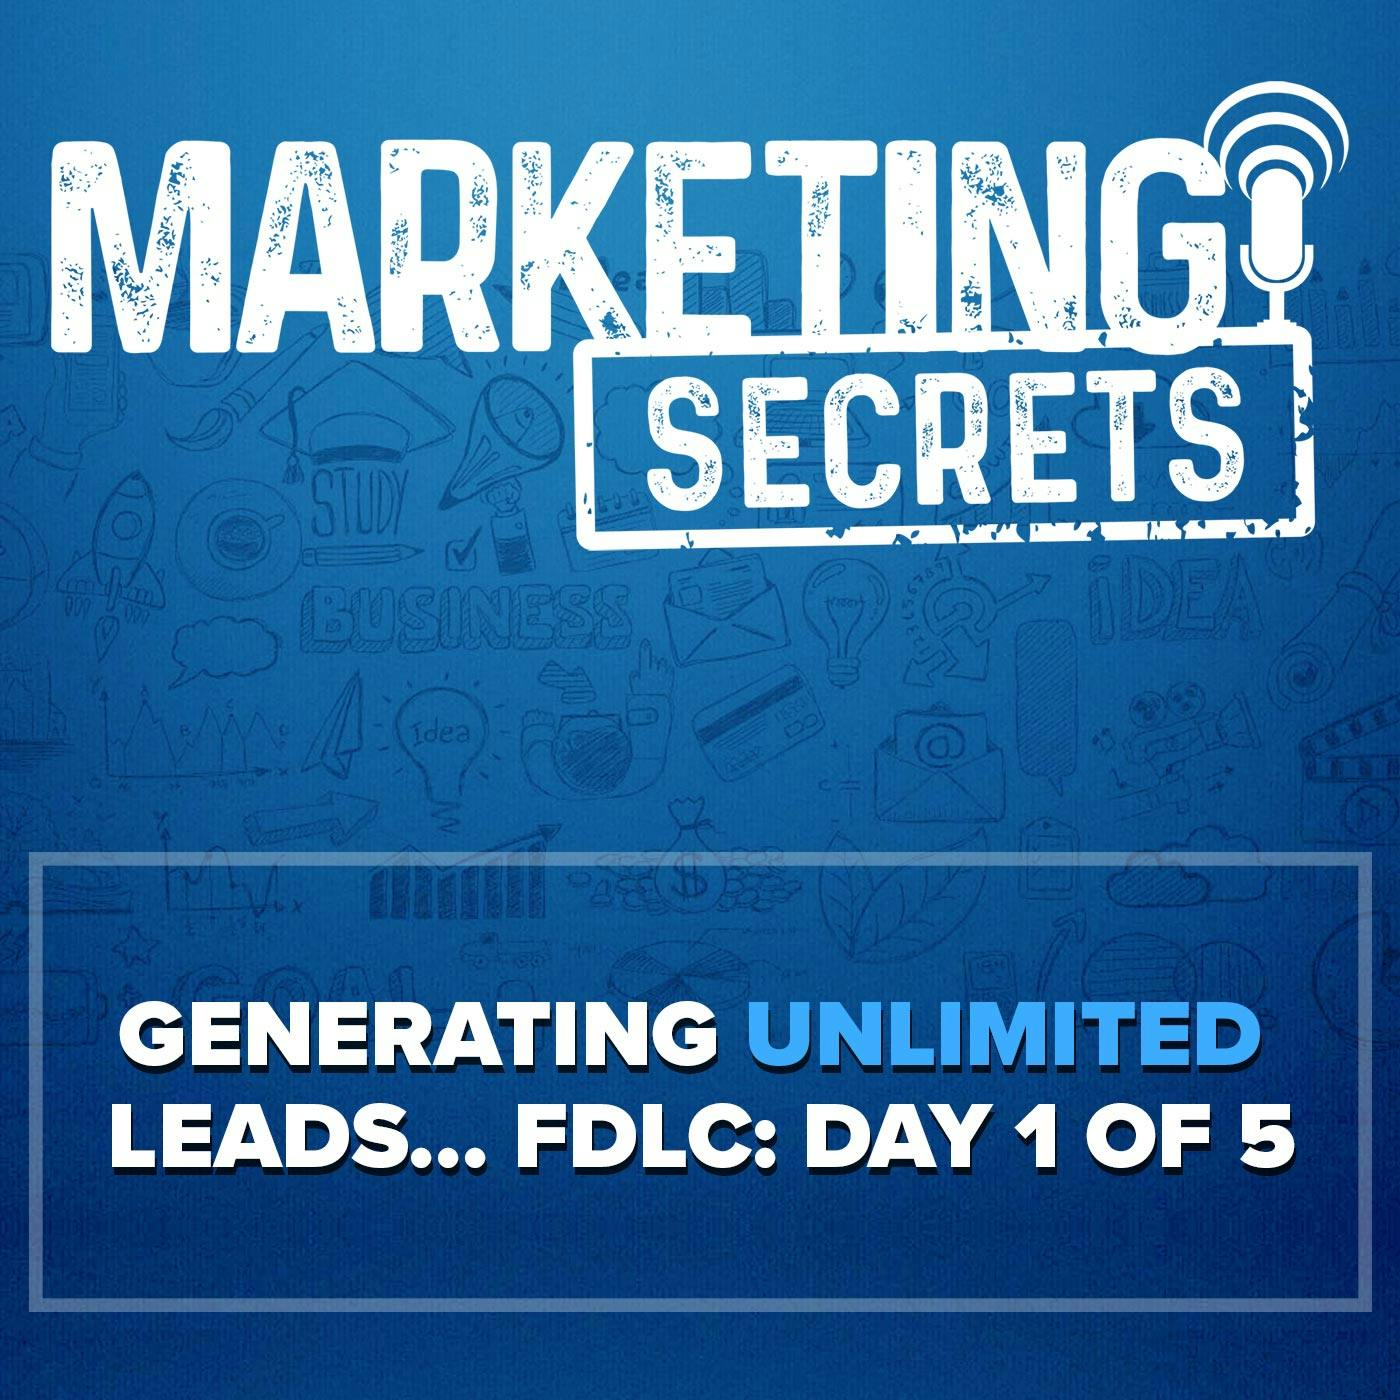 Generating Unlimited Leads... - FDLC: Day 1 of 5